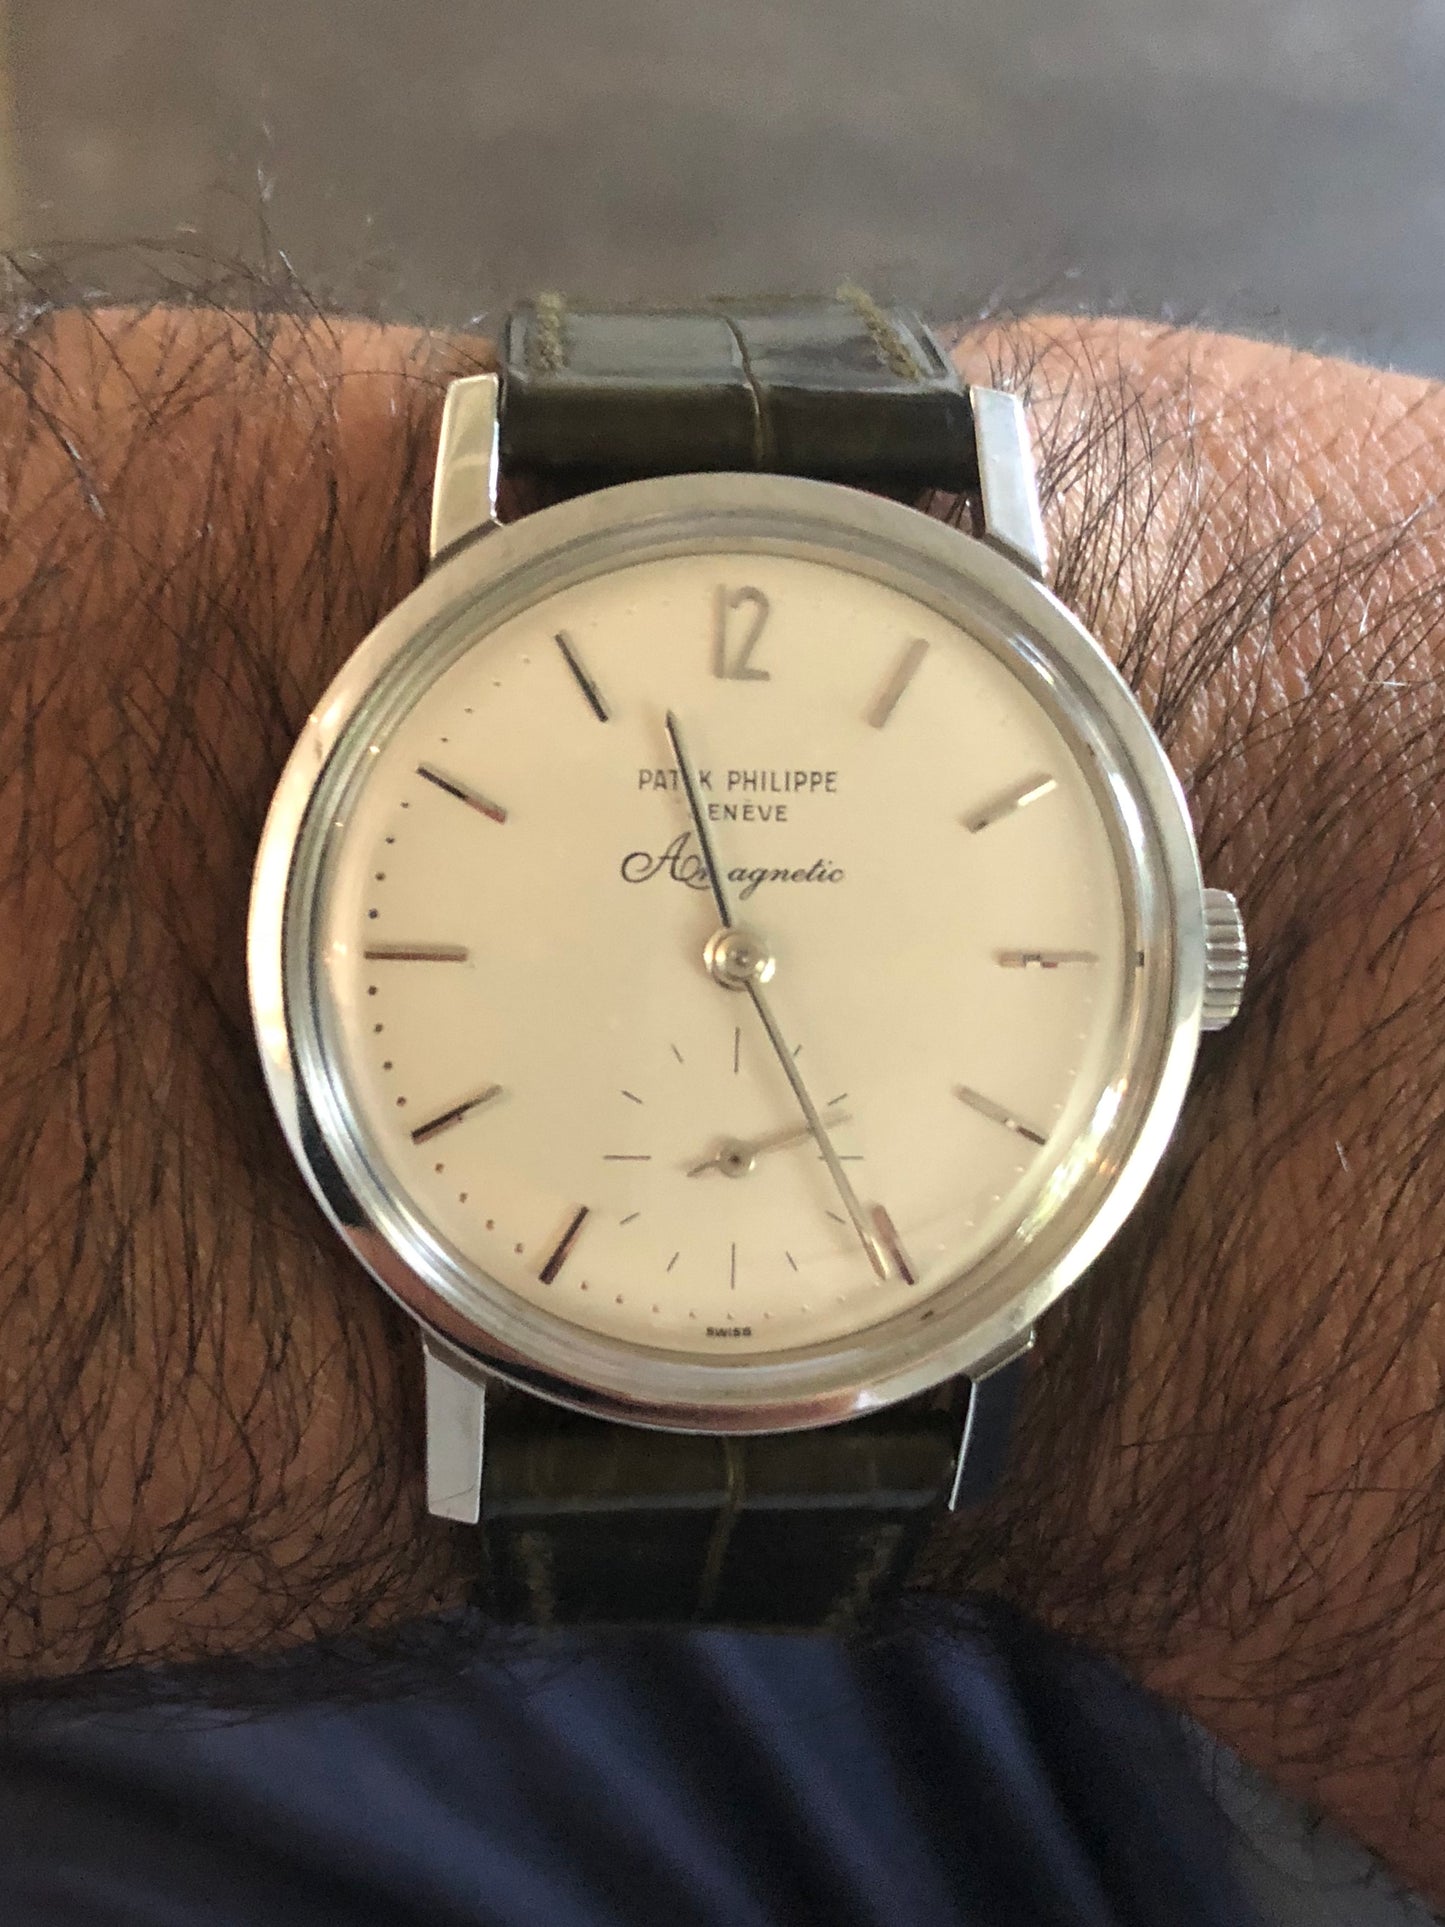 Patek Philippe Ref 3417 A, Amagnetic, 1969 Extremely Rare